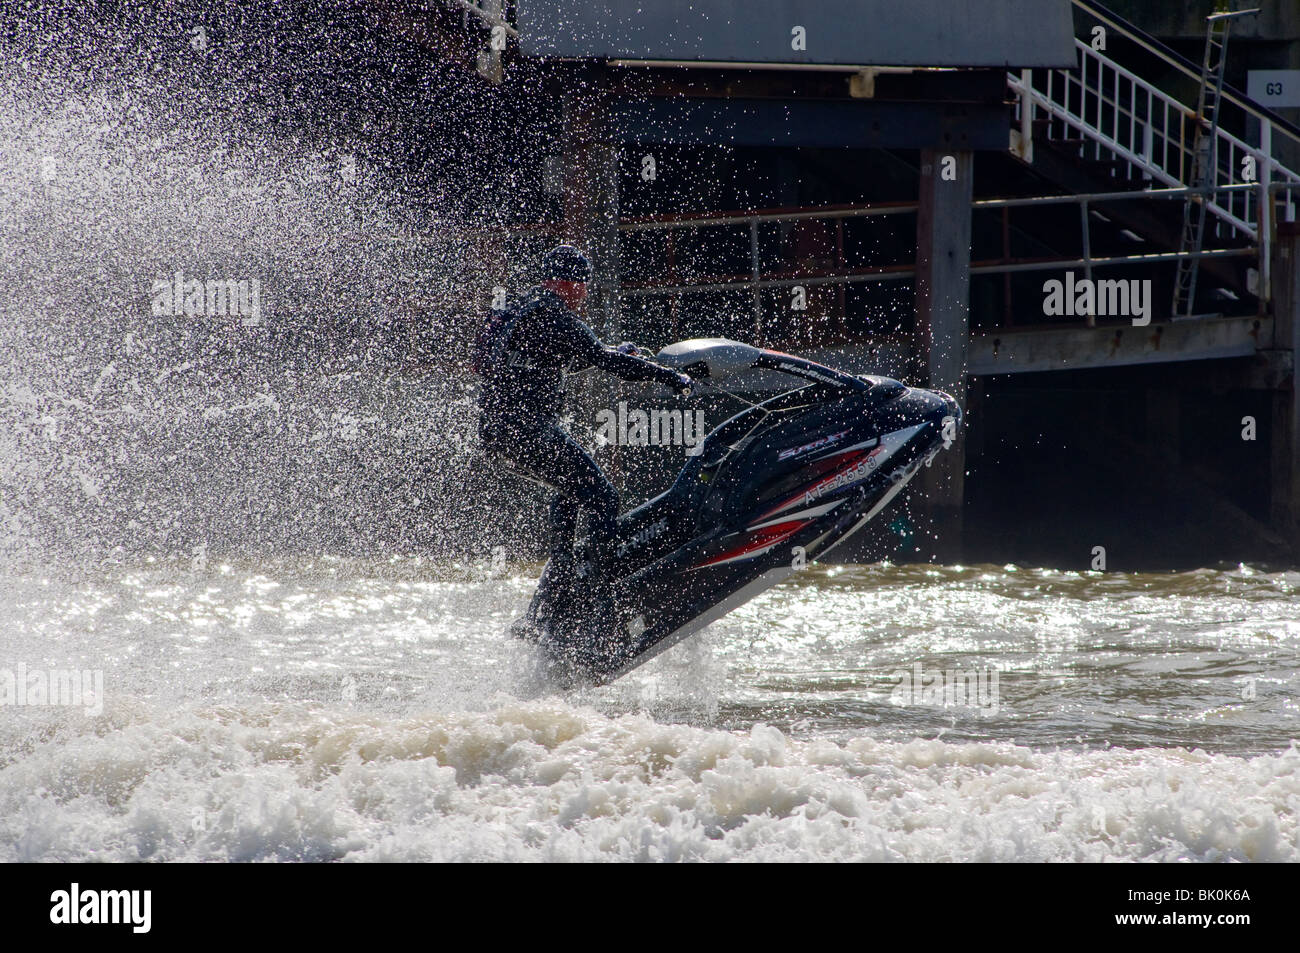 Jet skiing off the beach in Bournemouth, jumping the surf and having fun. Stock Photo